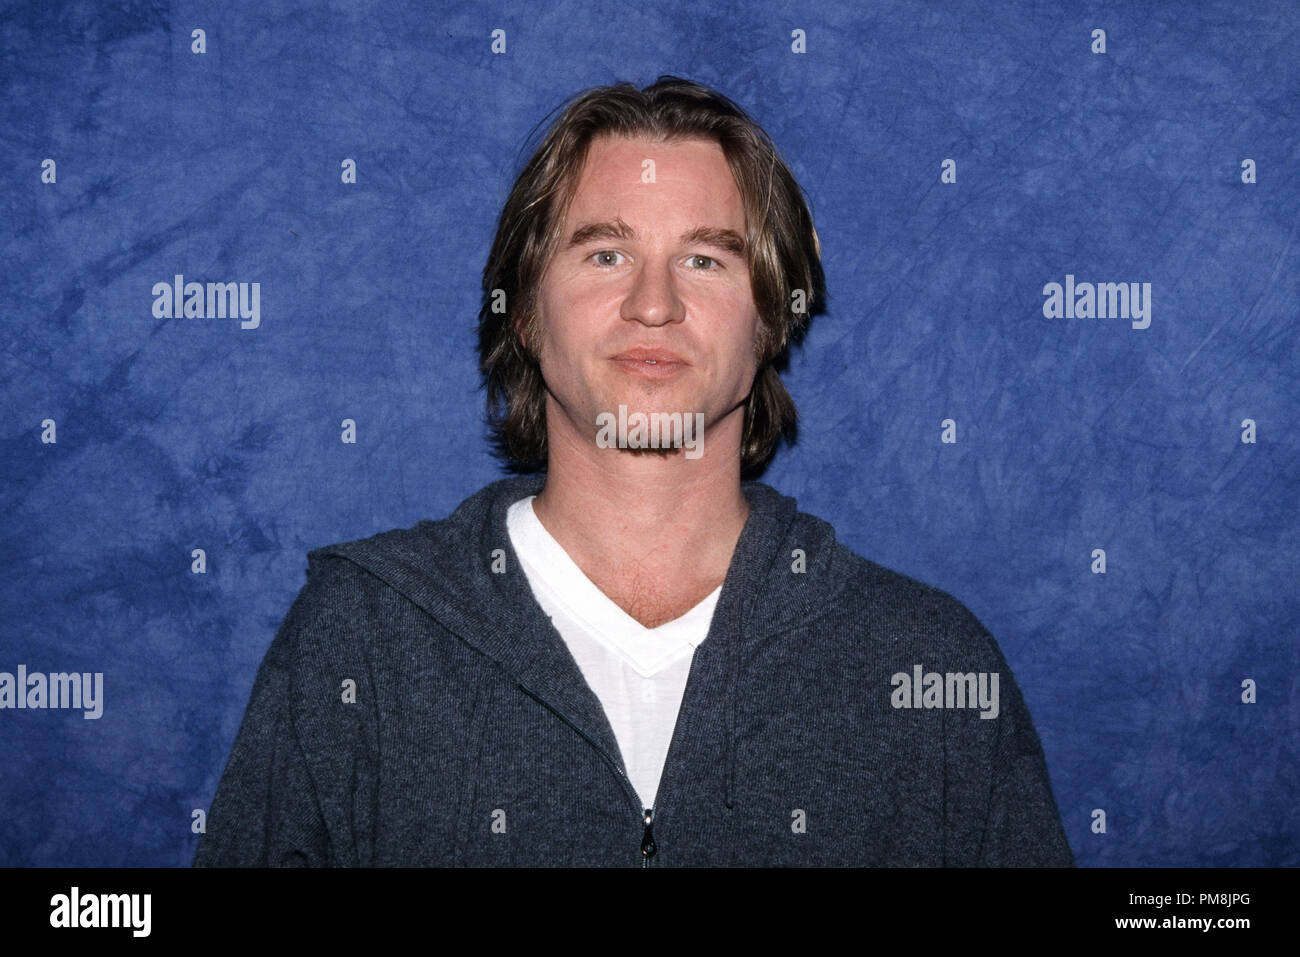 Val Kilmer 1998 © JRC /The Hollywood Archive  -  All Rights Reserved  File Reference # 31515 517 Stock Photo